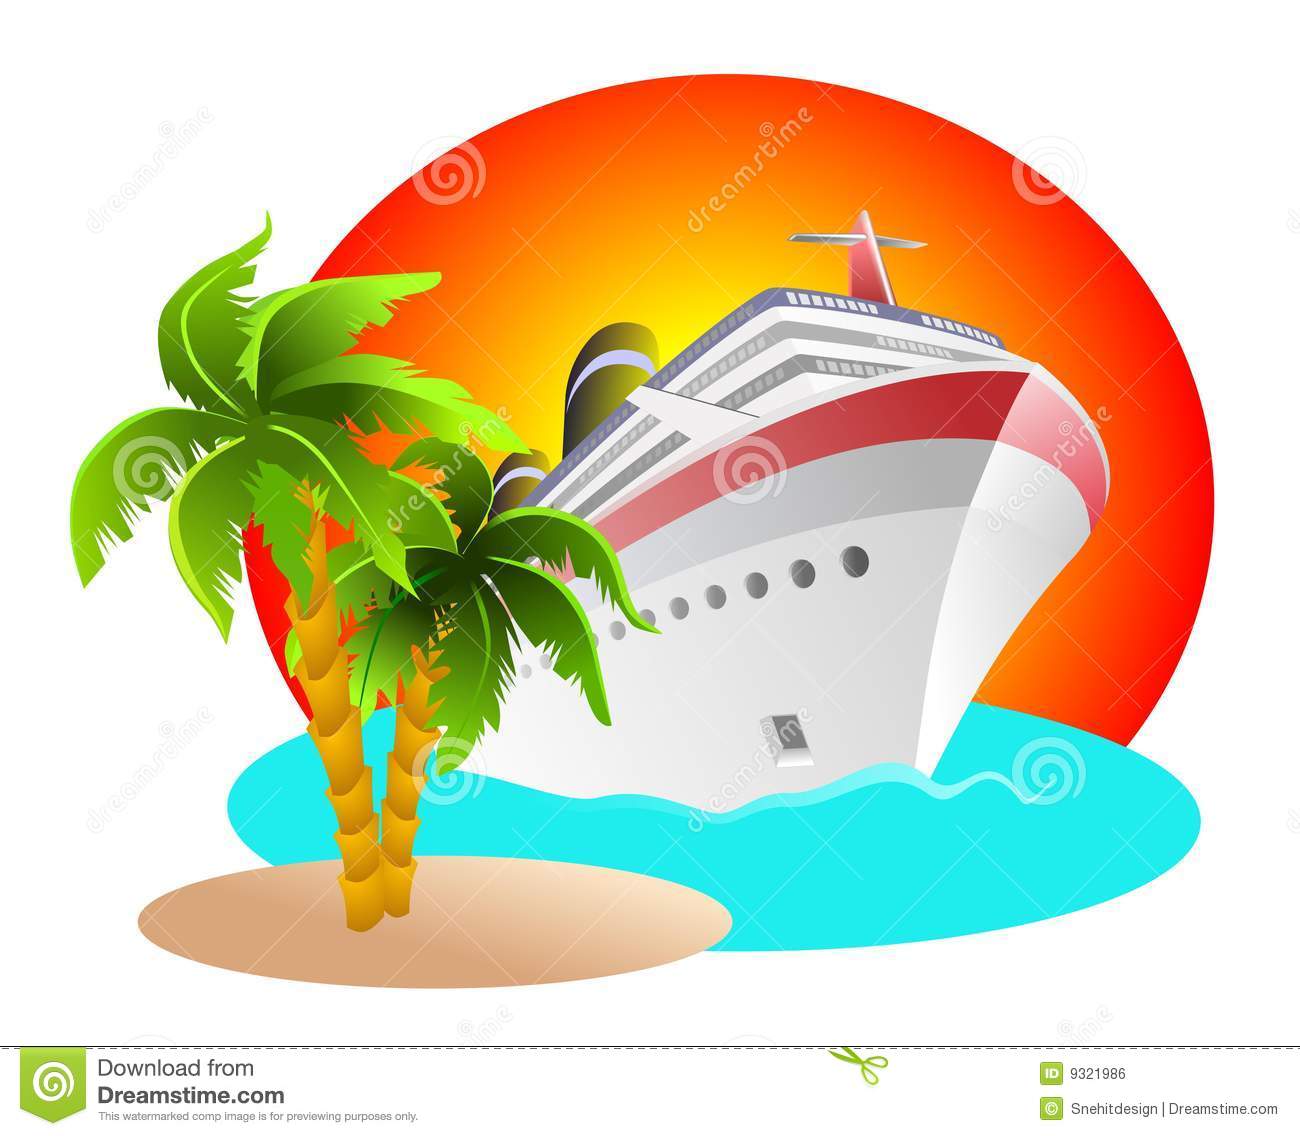 Cruise Clipart Royalty Free Stock Image